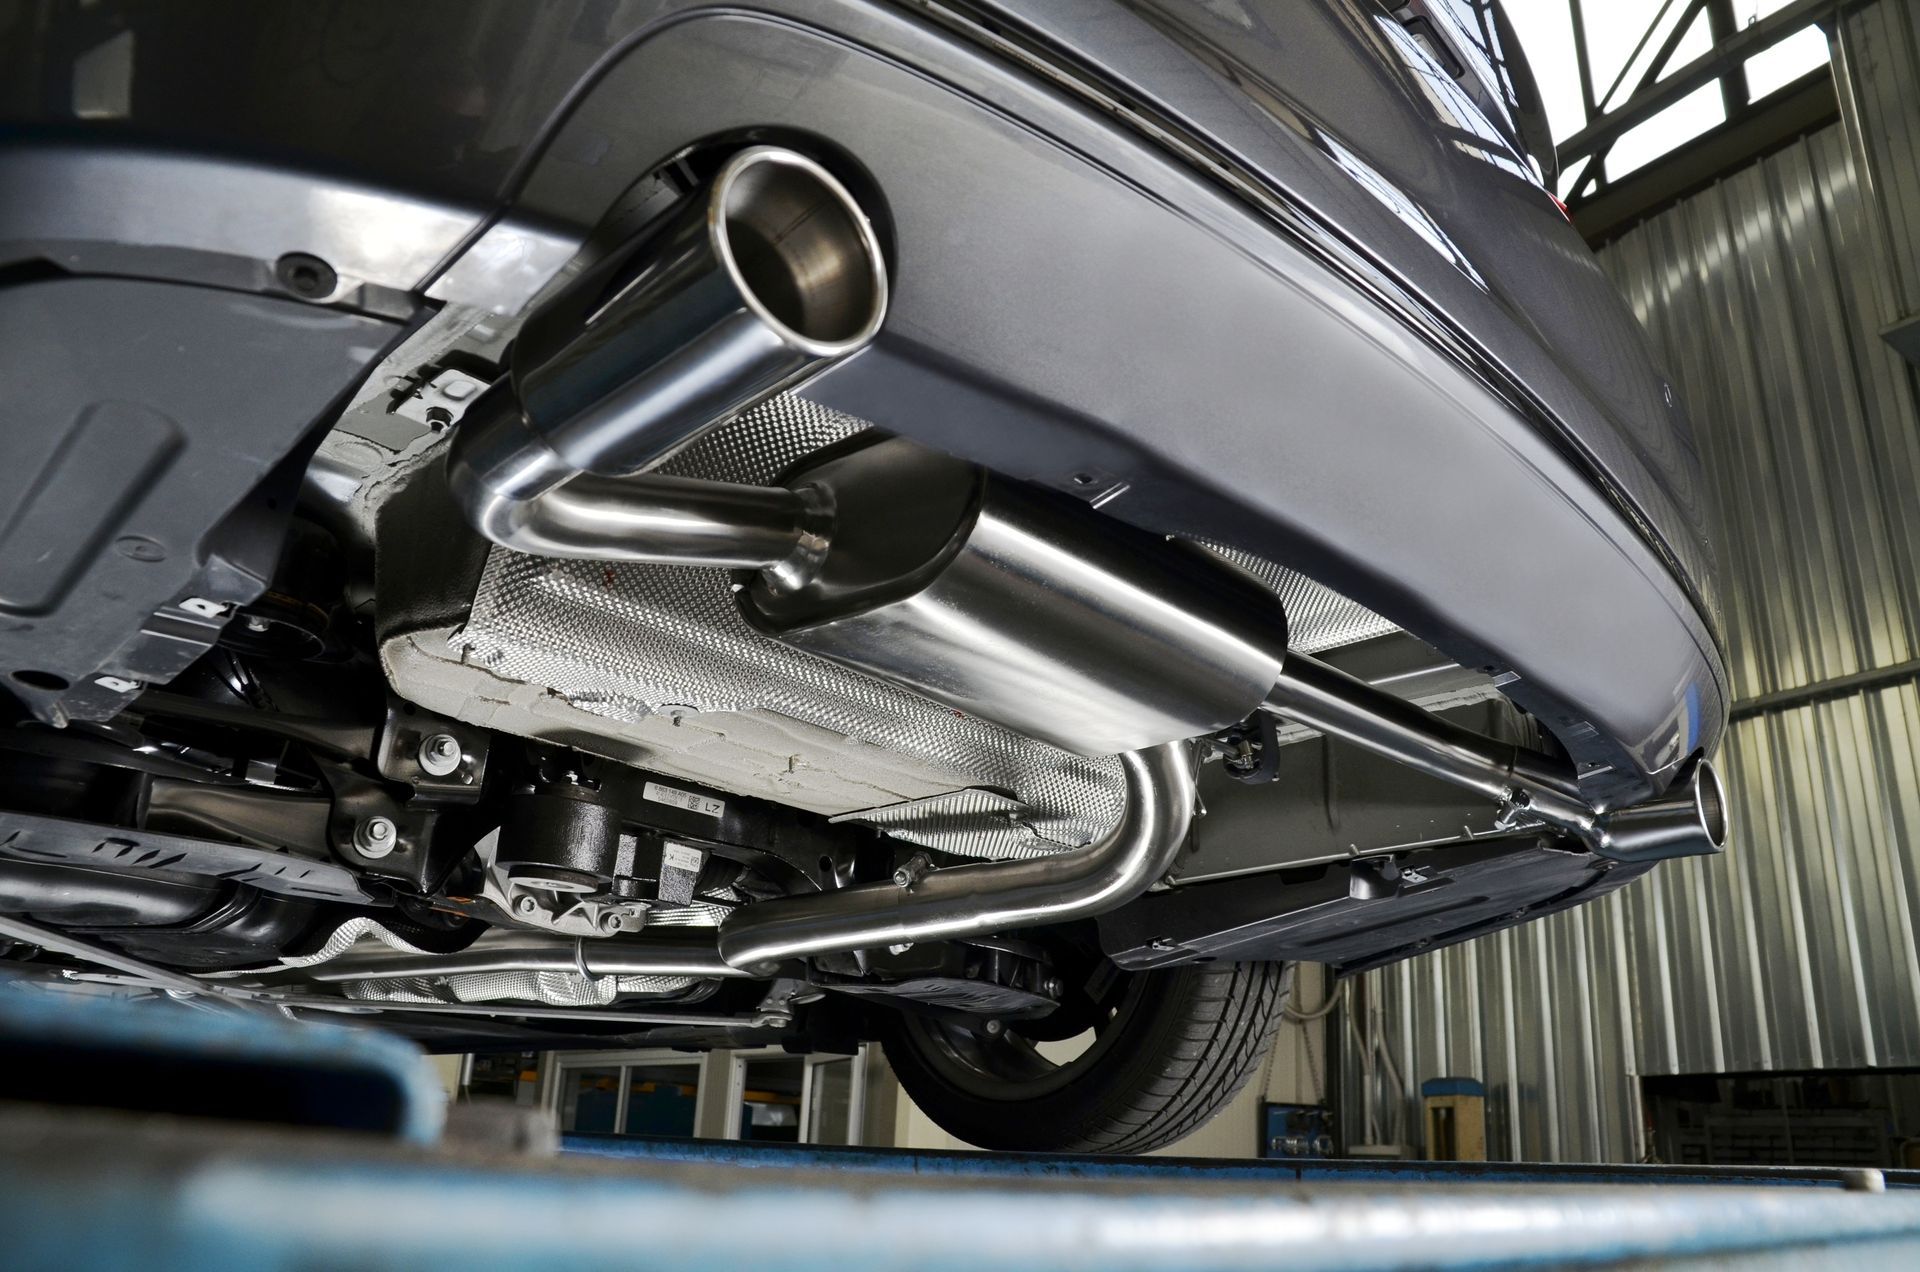 Exhaust Service at ﻿Brakes Tires & More﻿ in ﻿Yuba City, CA﻿